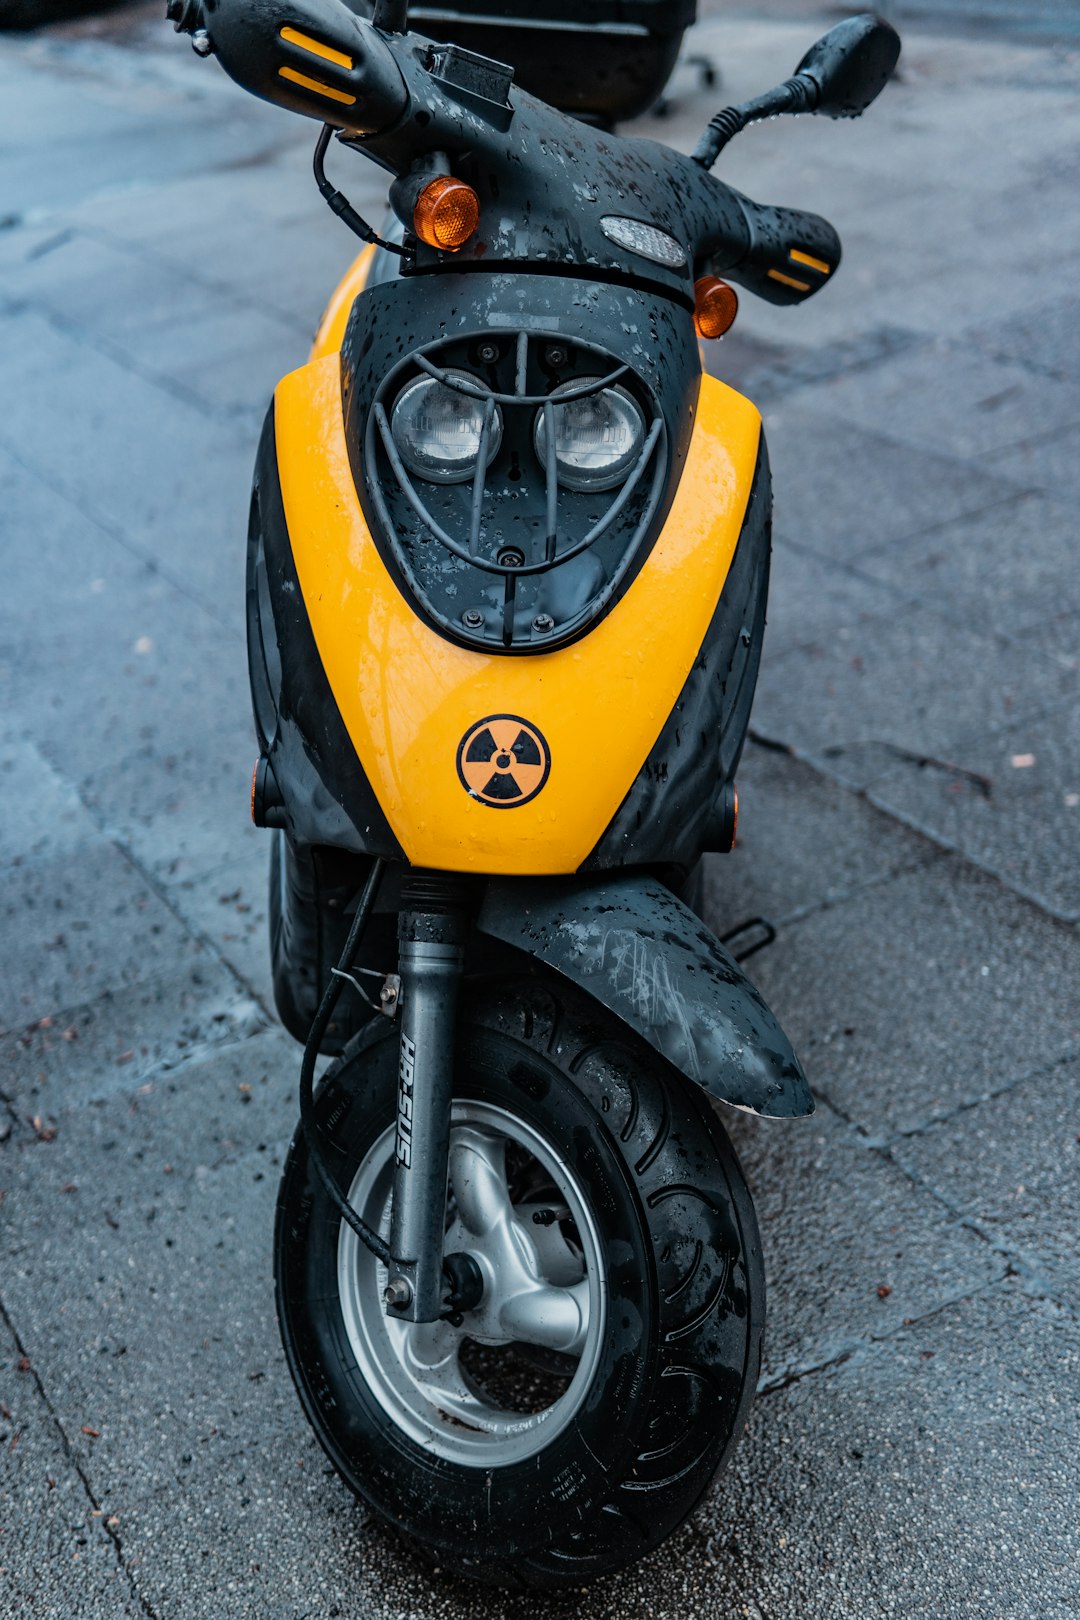 yellow and black motor scooter parked on concrete pavement